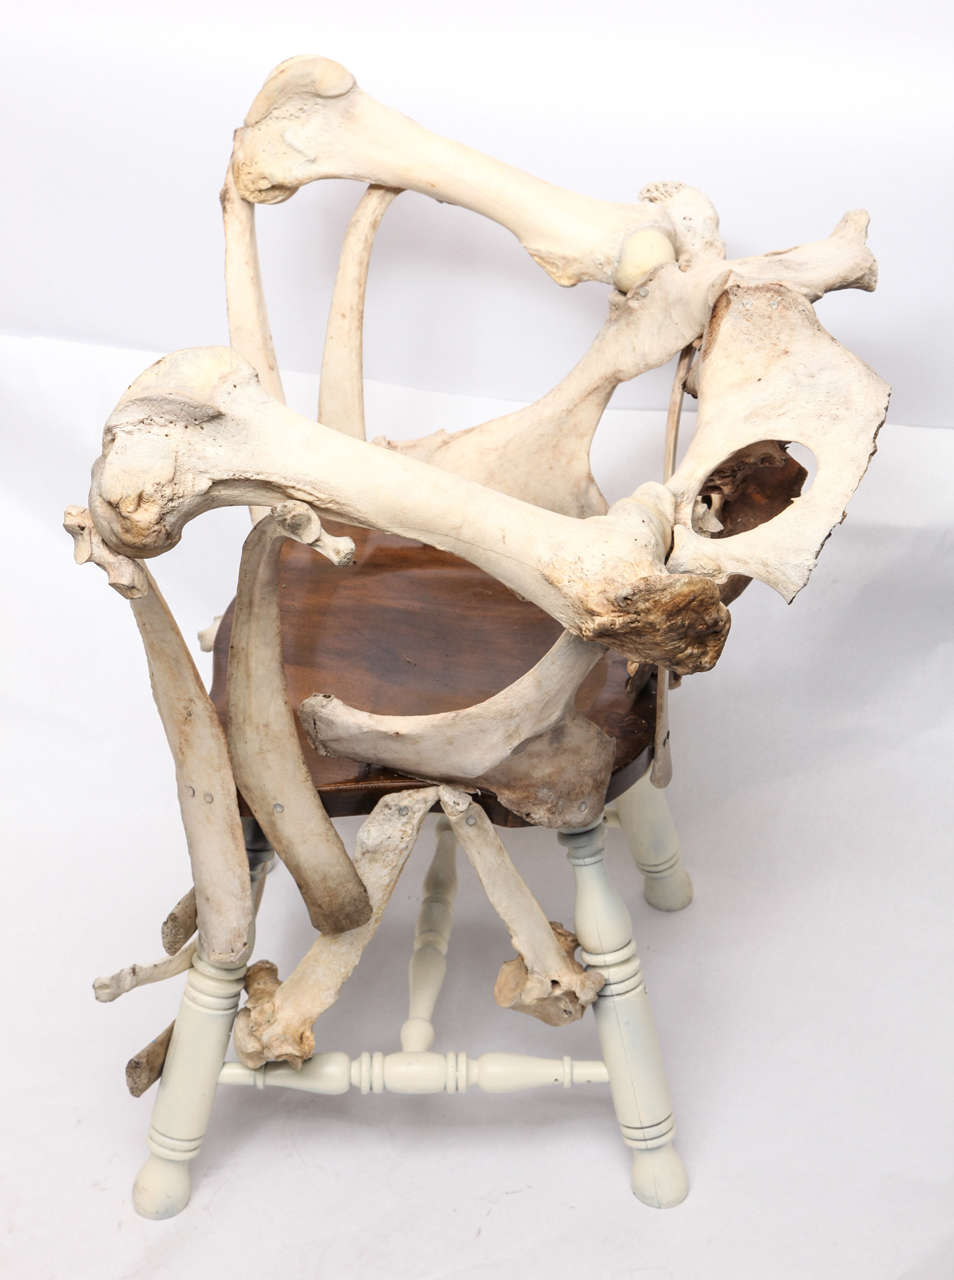 American Modernist Sculptural Chair Crafted Out of Cow Bones